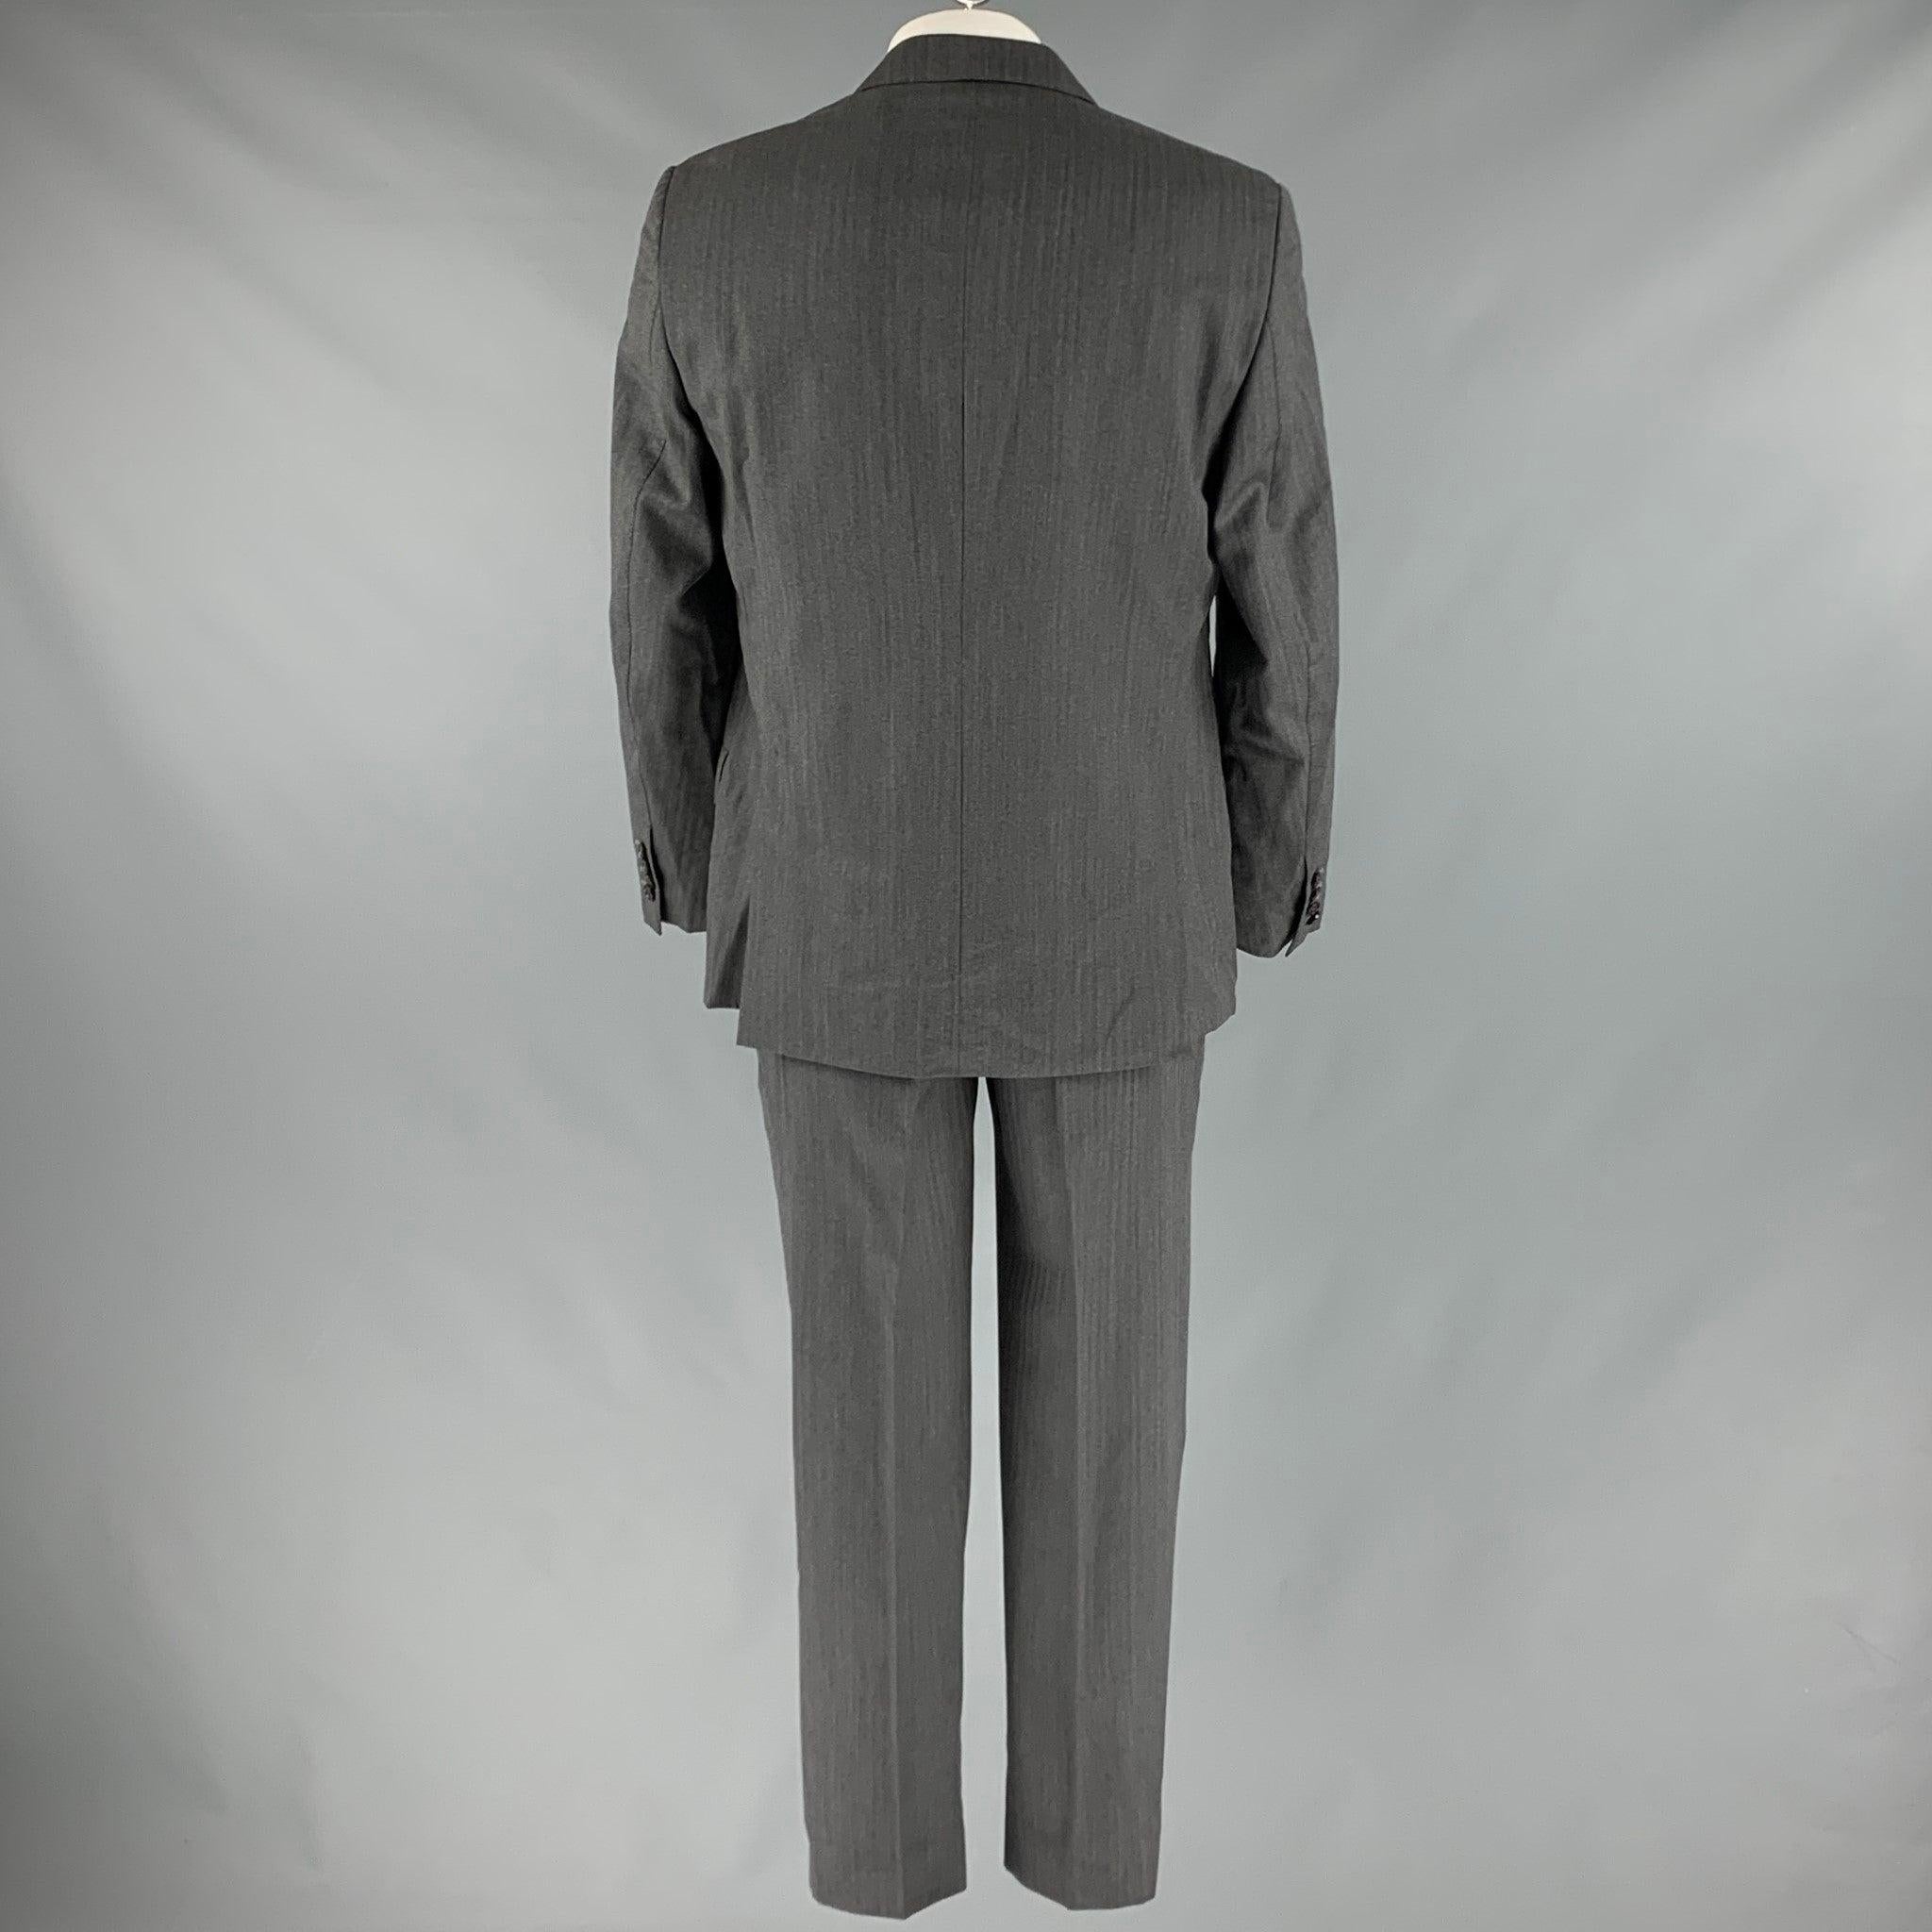 PAUL SMITH Size 42 Charcoal Herringbone Wool Notch Lapel Suit In Good Condition For Sale In San Francisco, CA